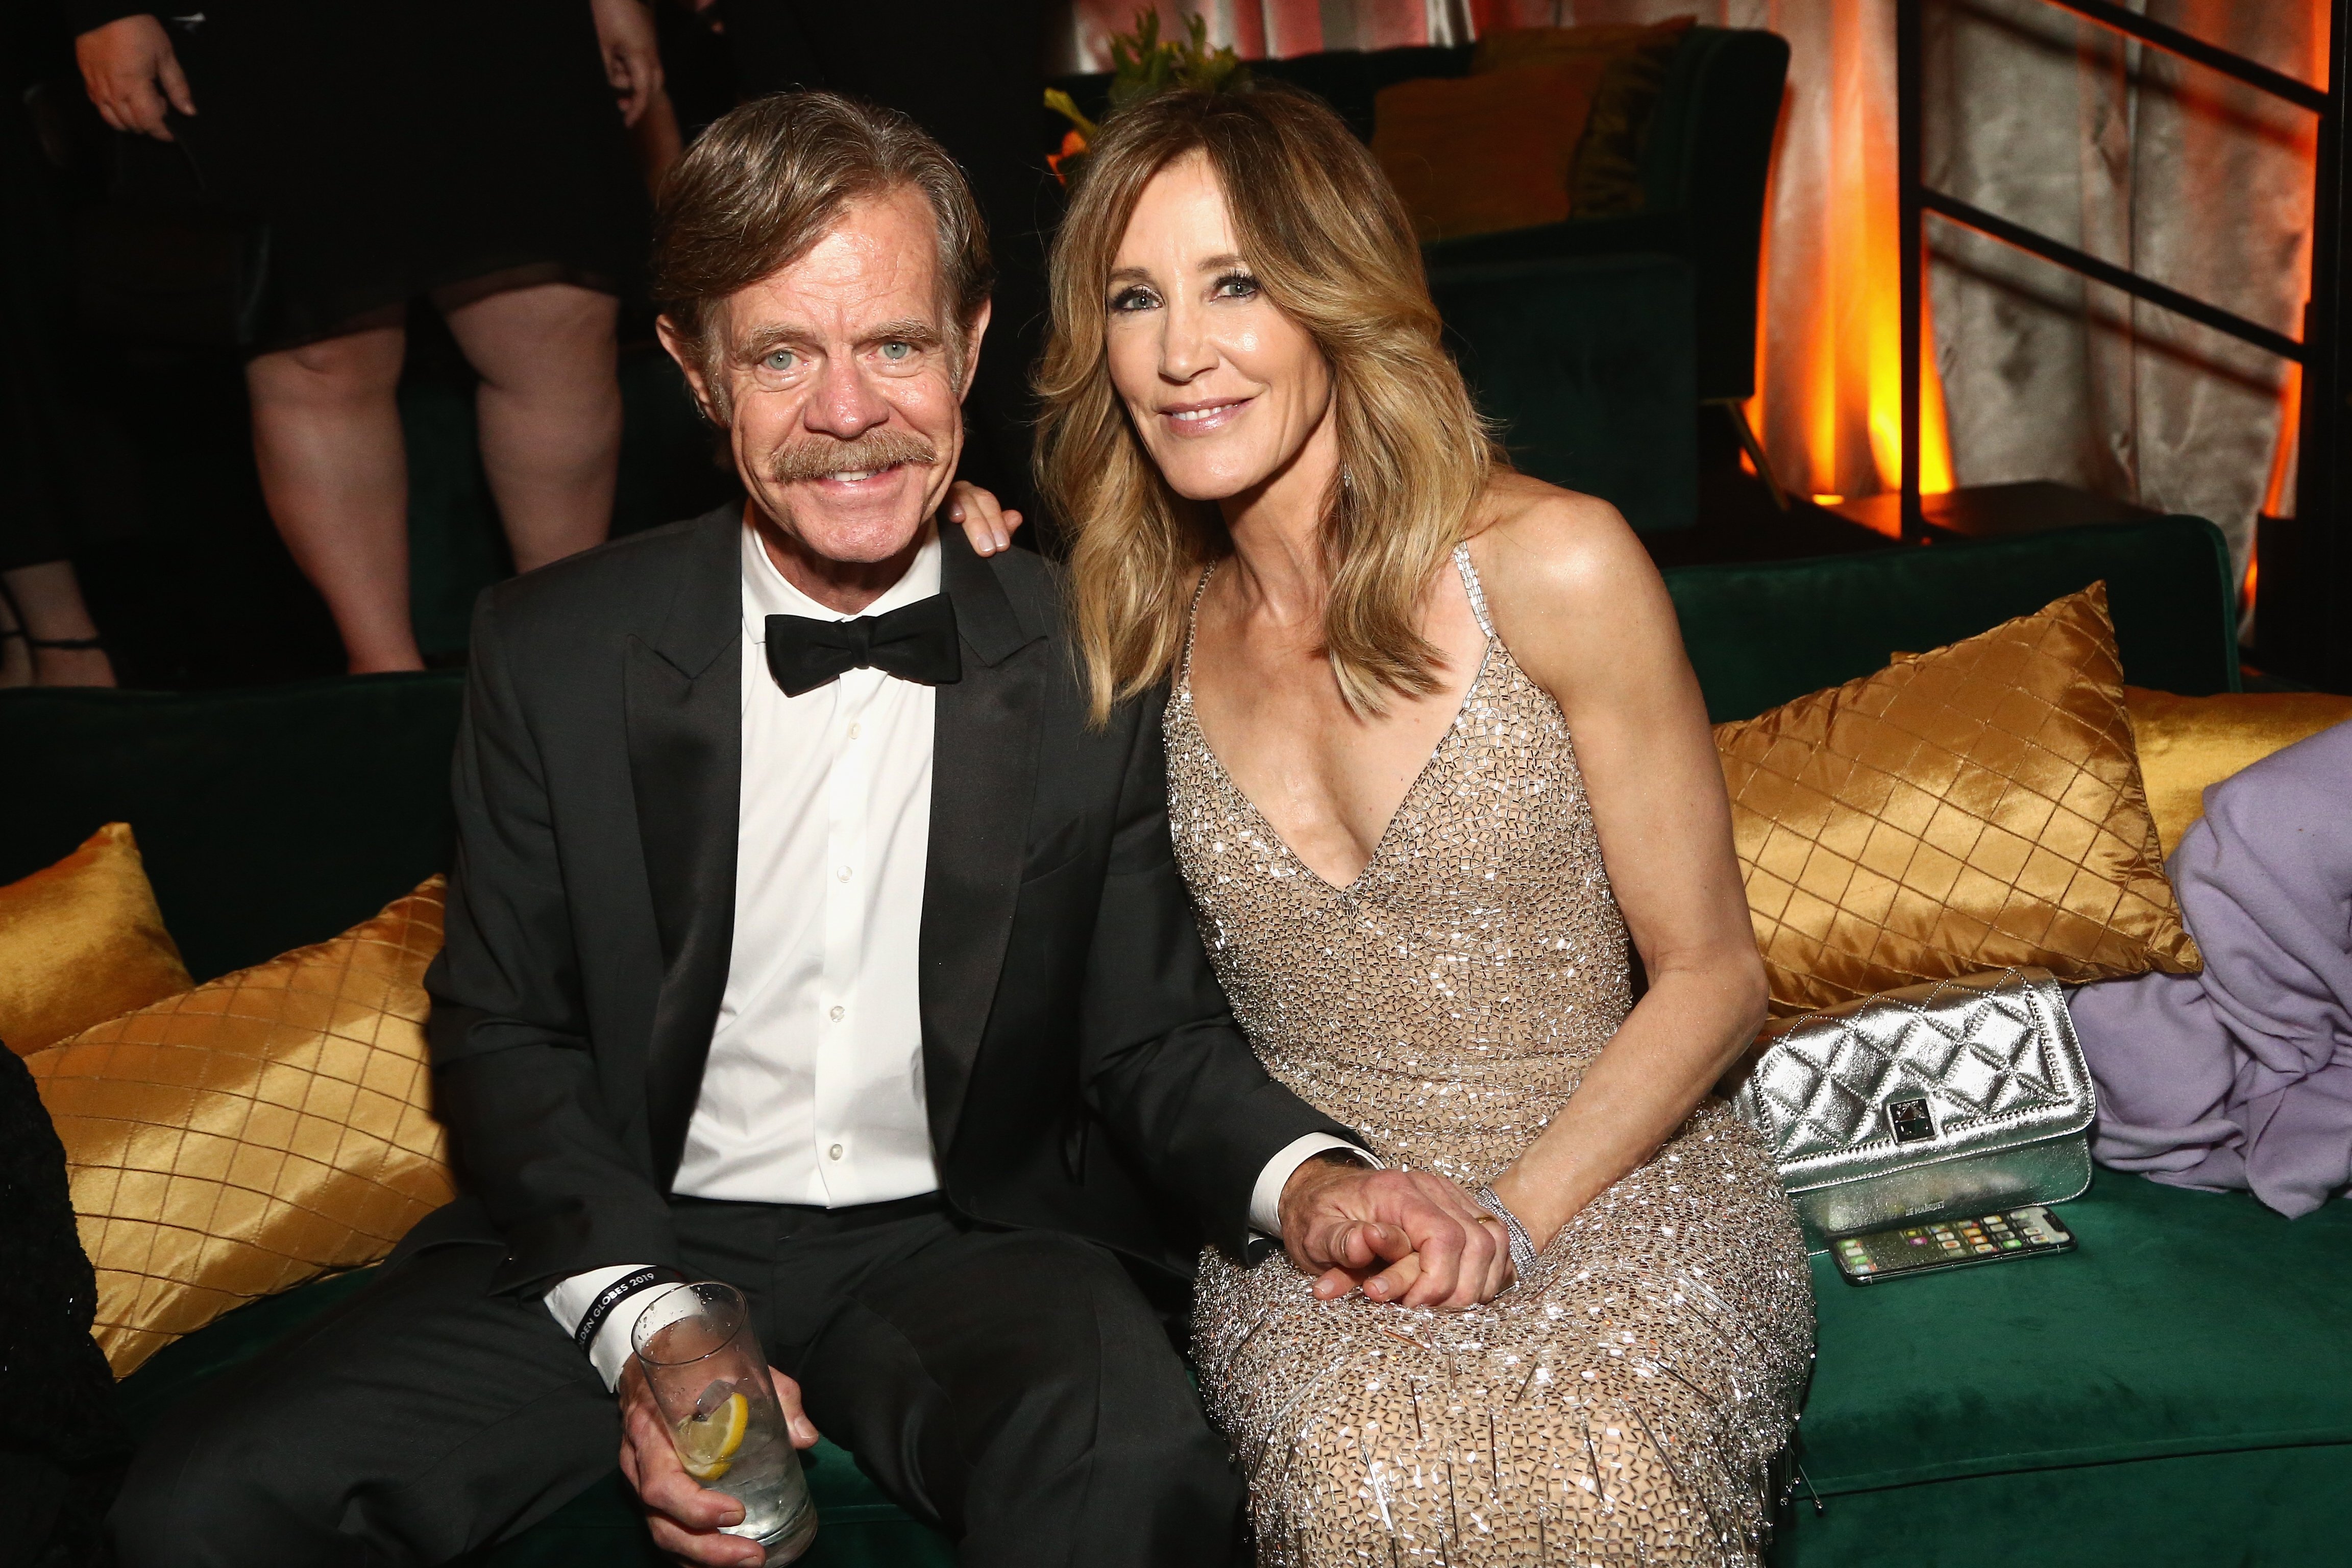 Felicity Huffman and William H. Macy at the Netflix 2019 Golden Globes After Party on January 6, 2019 | Photo: GettyImages